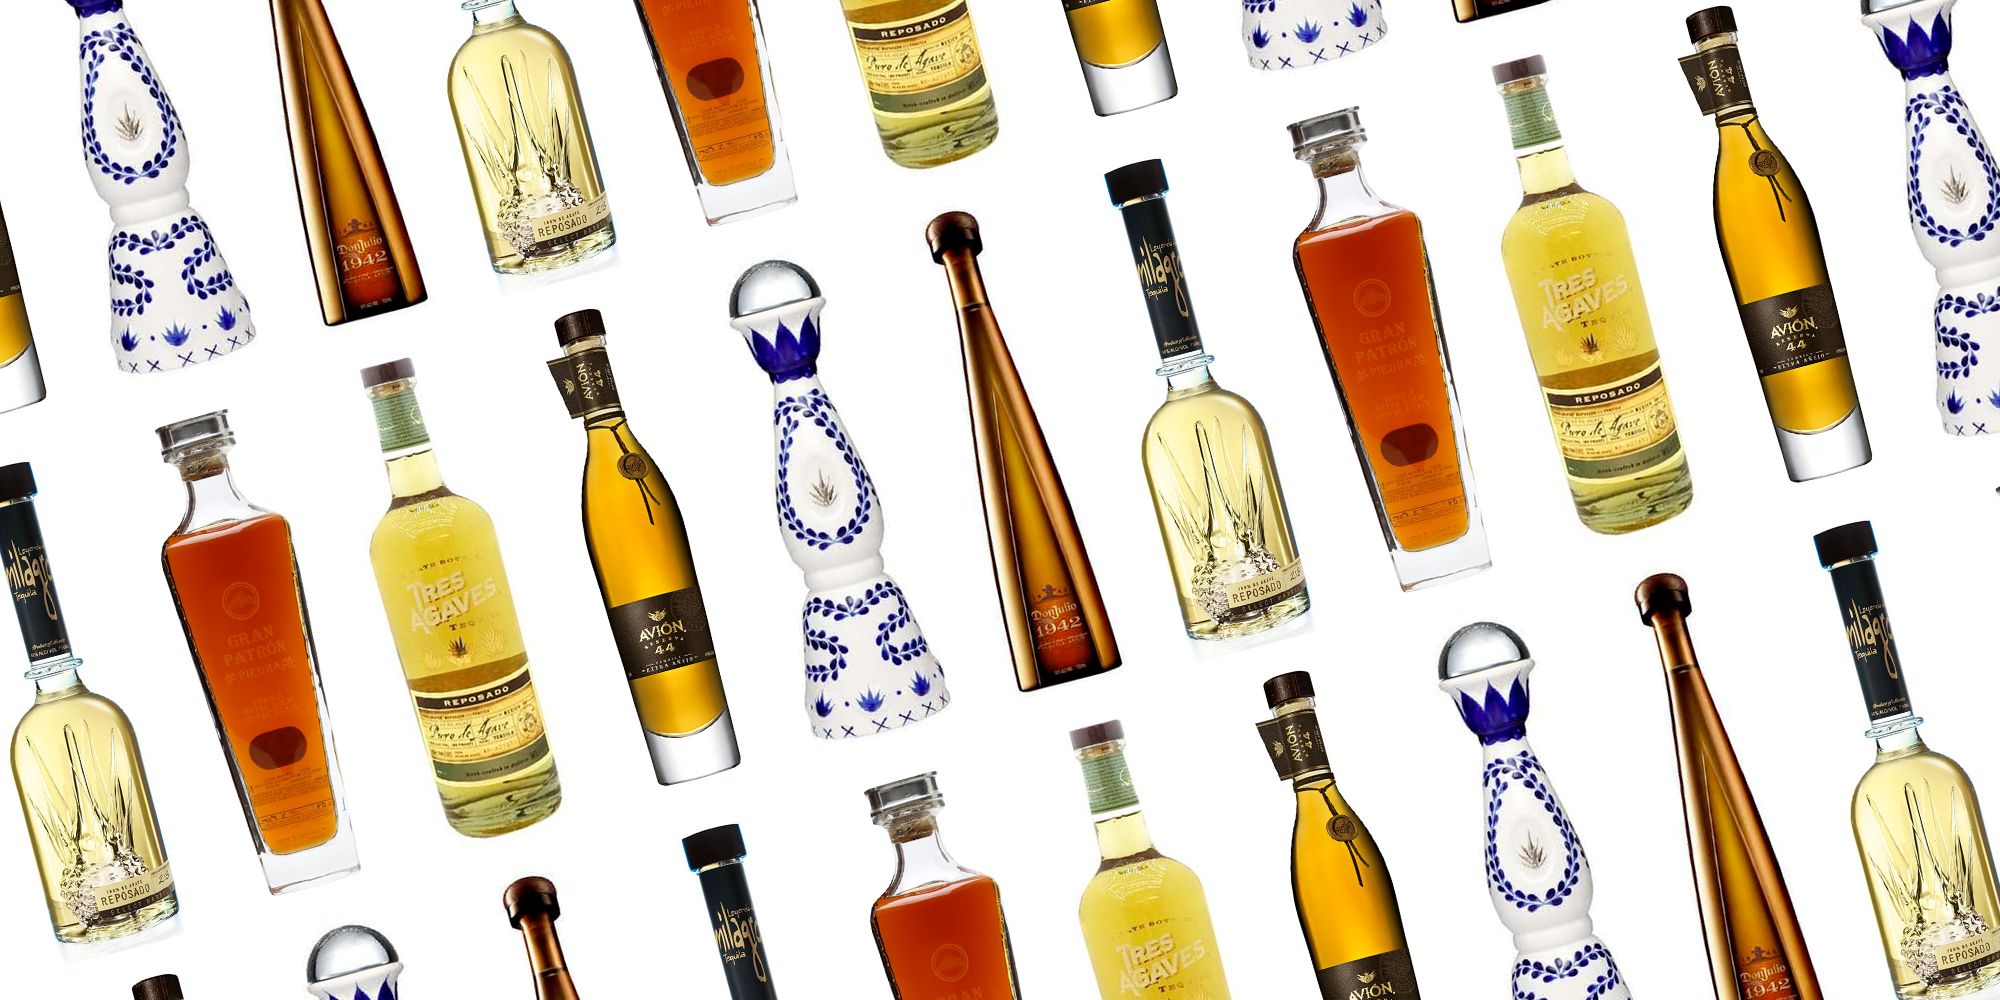 17 Best Sipping Tequilas 2020 Top Tequila Bottles Brands To Try,Posion Ivy On Skin